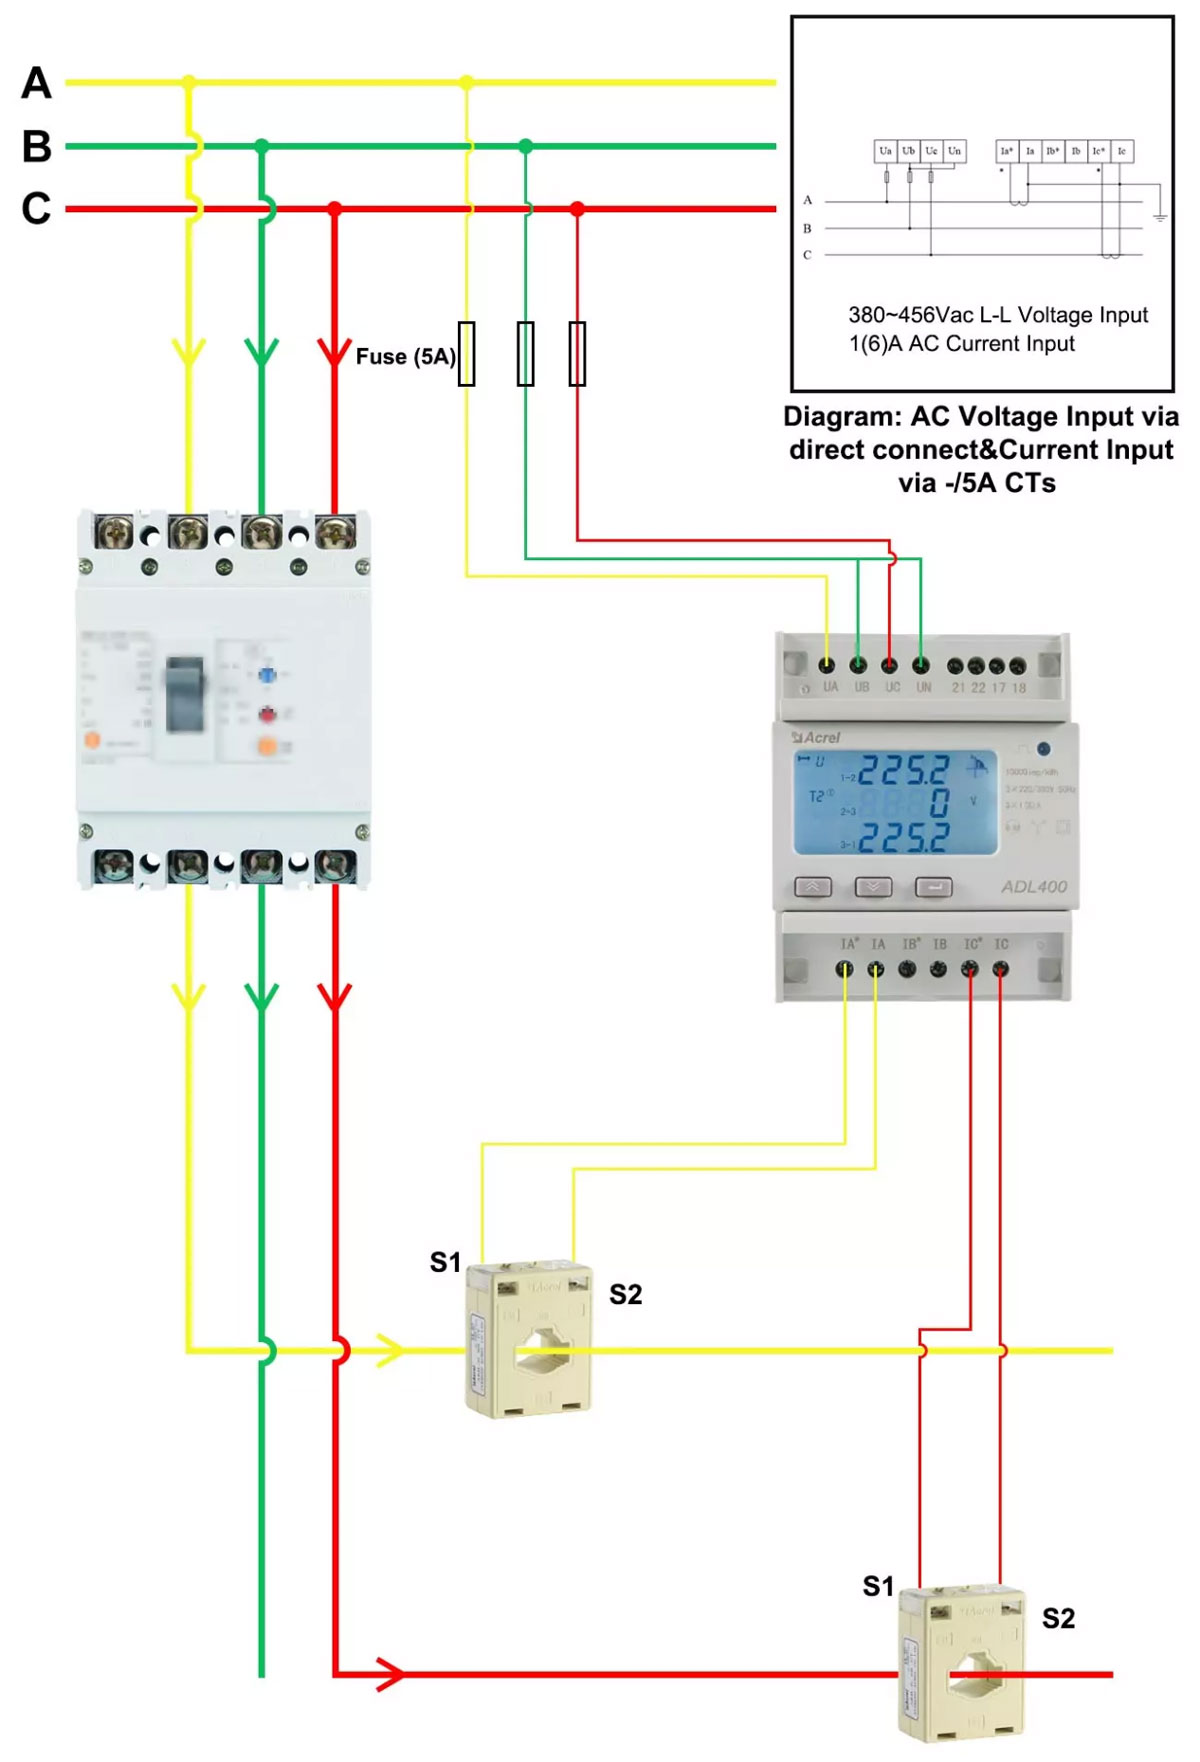 Power-Wiring-3-phase-3-wire-CT-operated.jpg